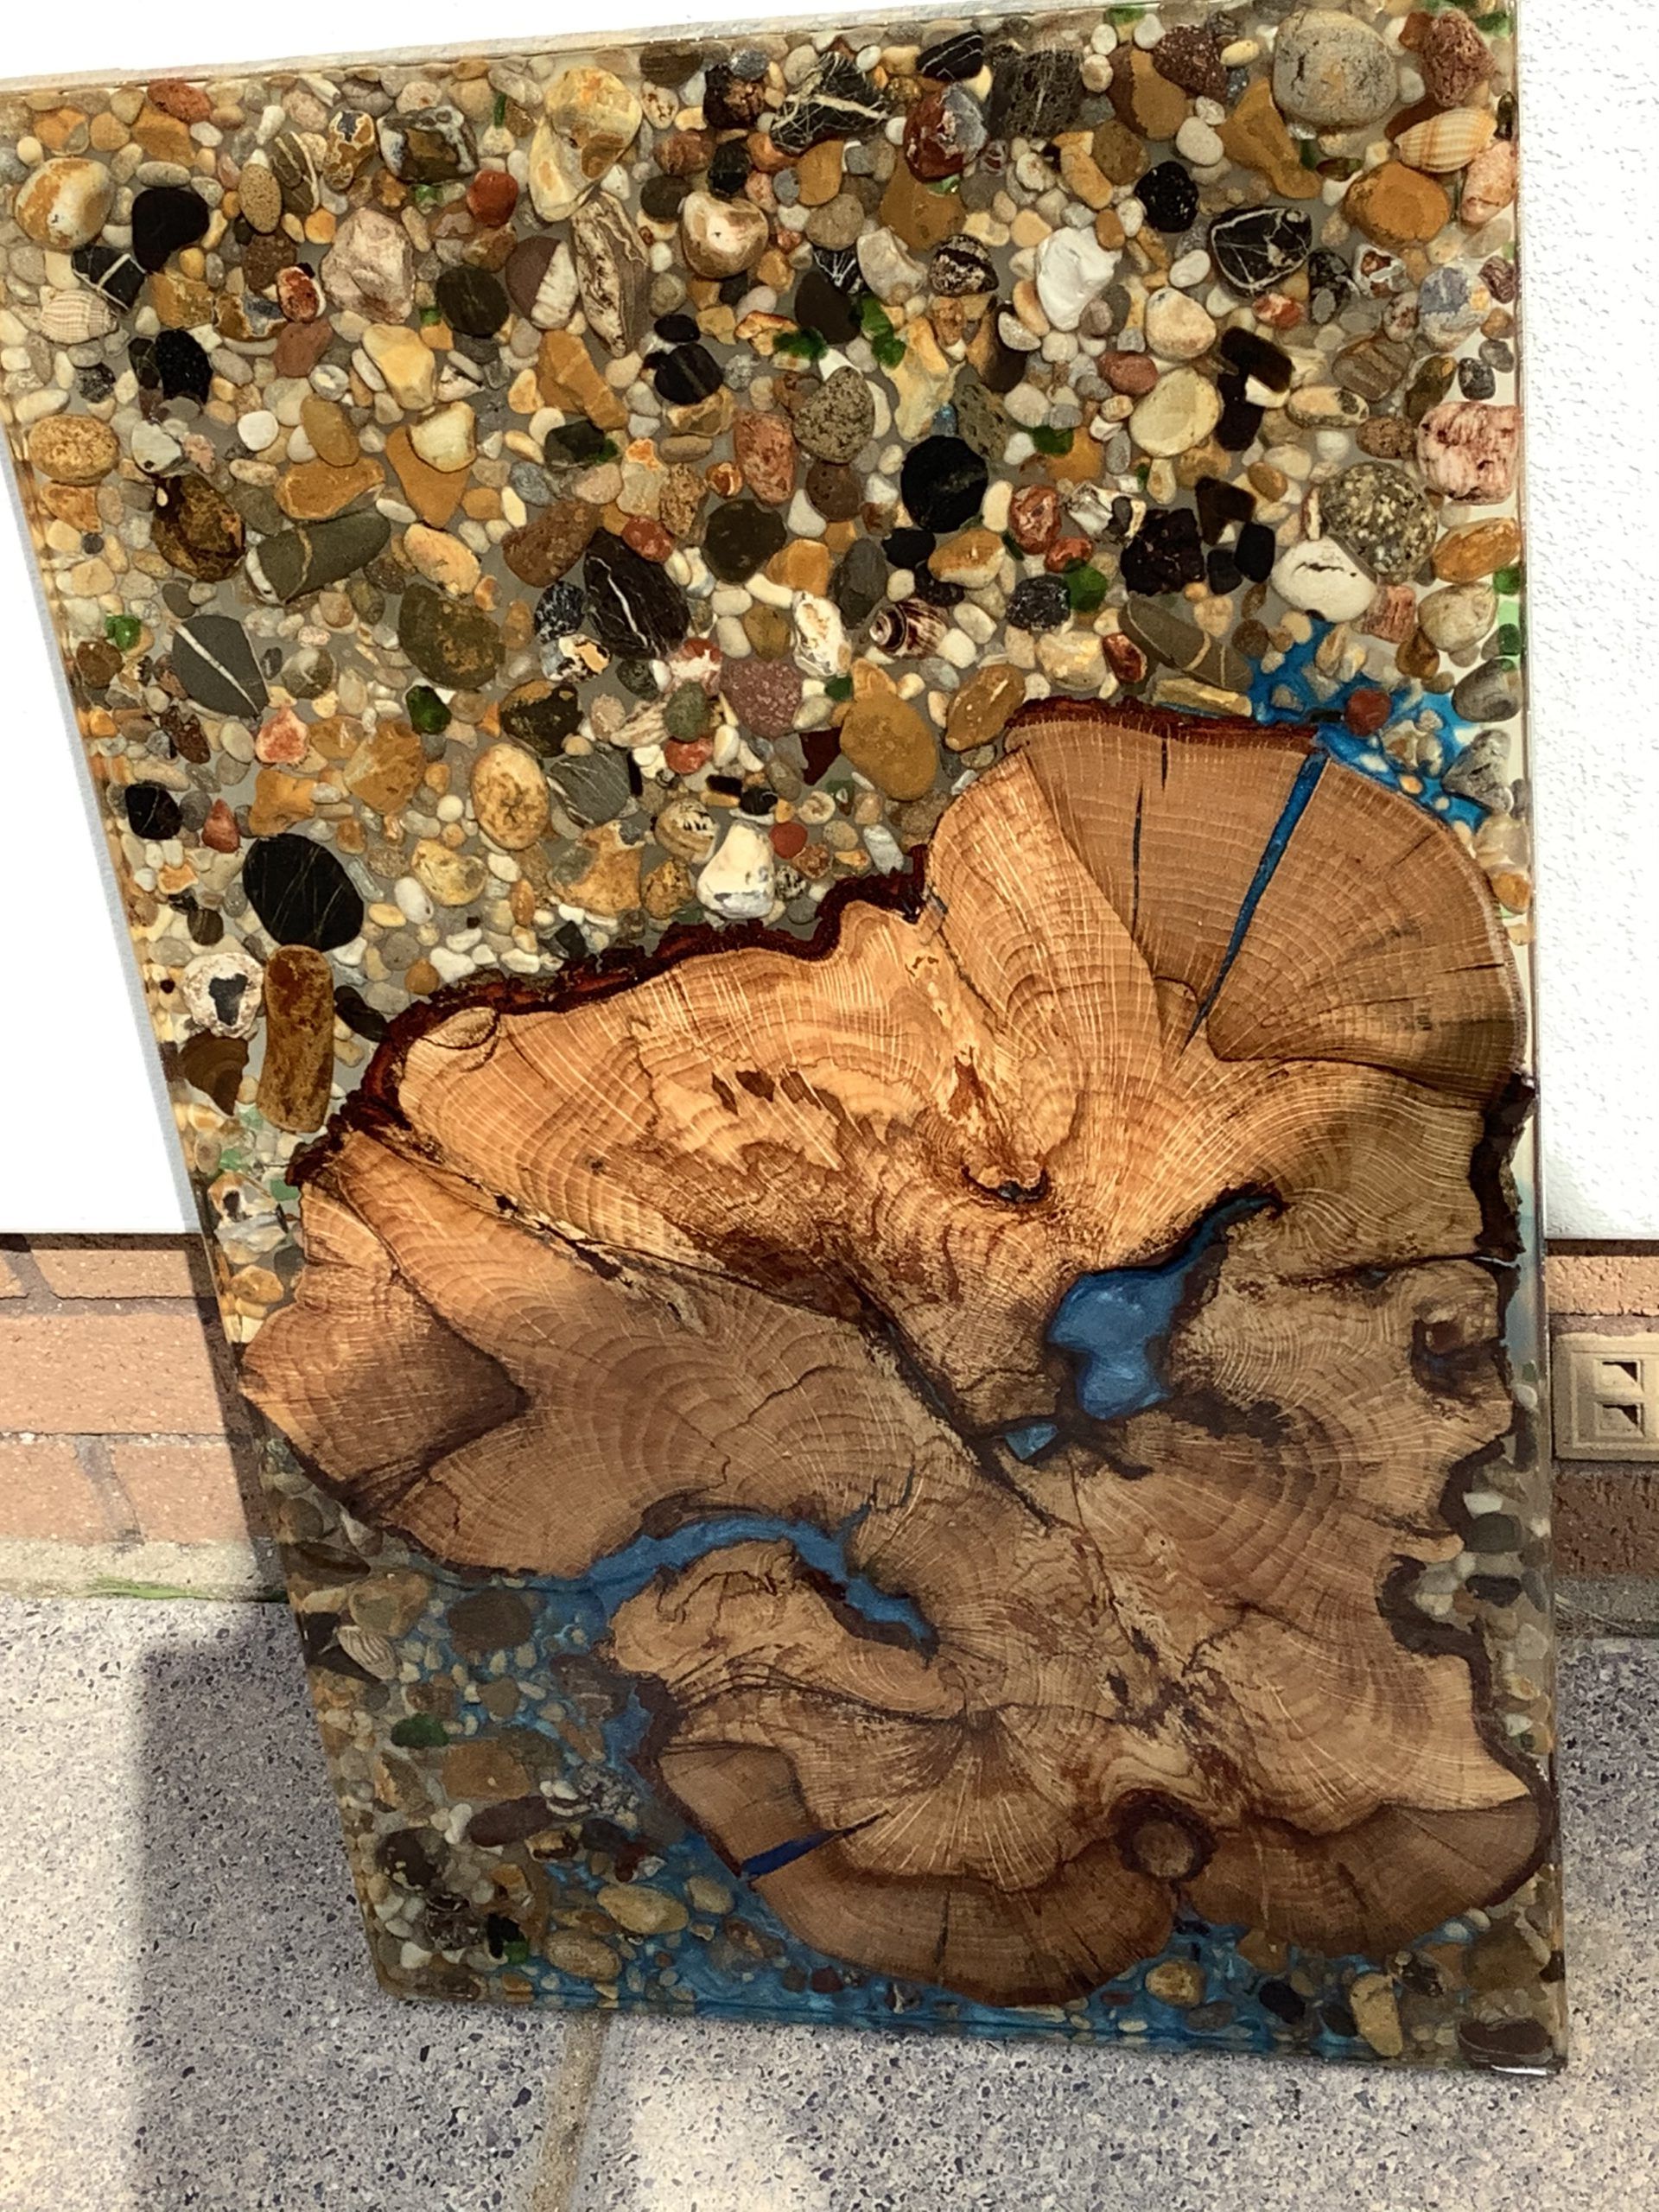 Most Recently Released Oak Wood, Blue Resin With Sea Pebbles And Shells Set In Throughout Oak Wood Wall Art (View 12 of 20)